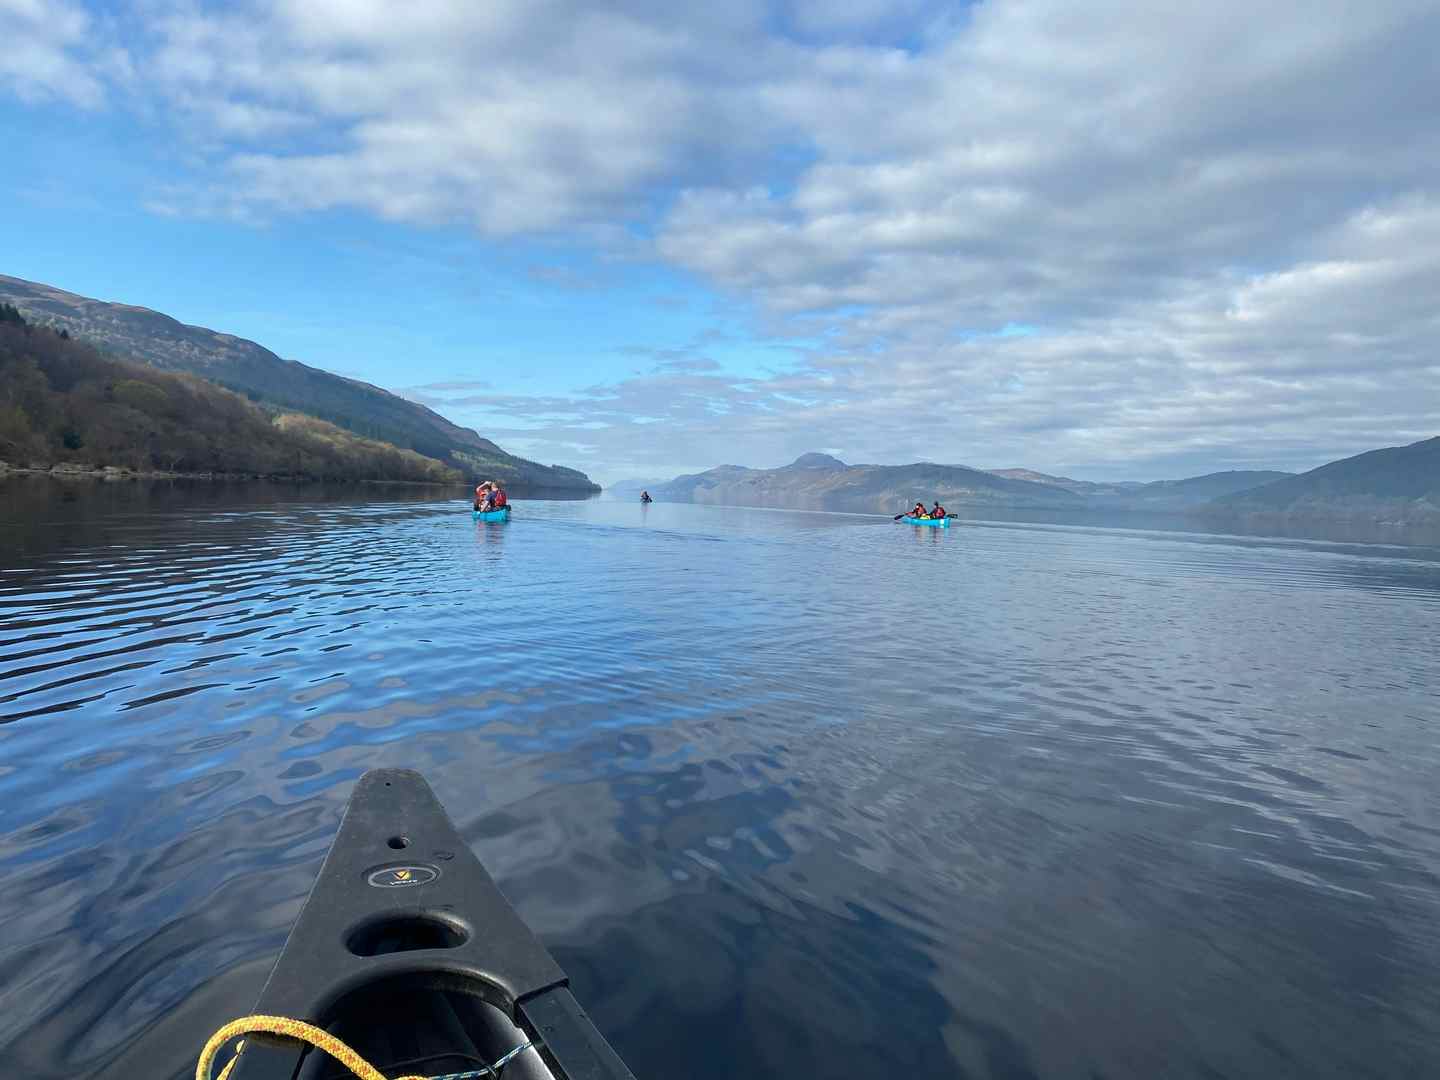 Our canoe trip along the Great Glen way cou...